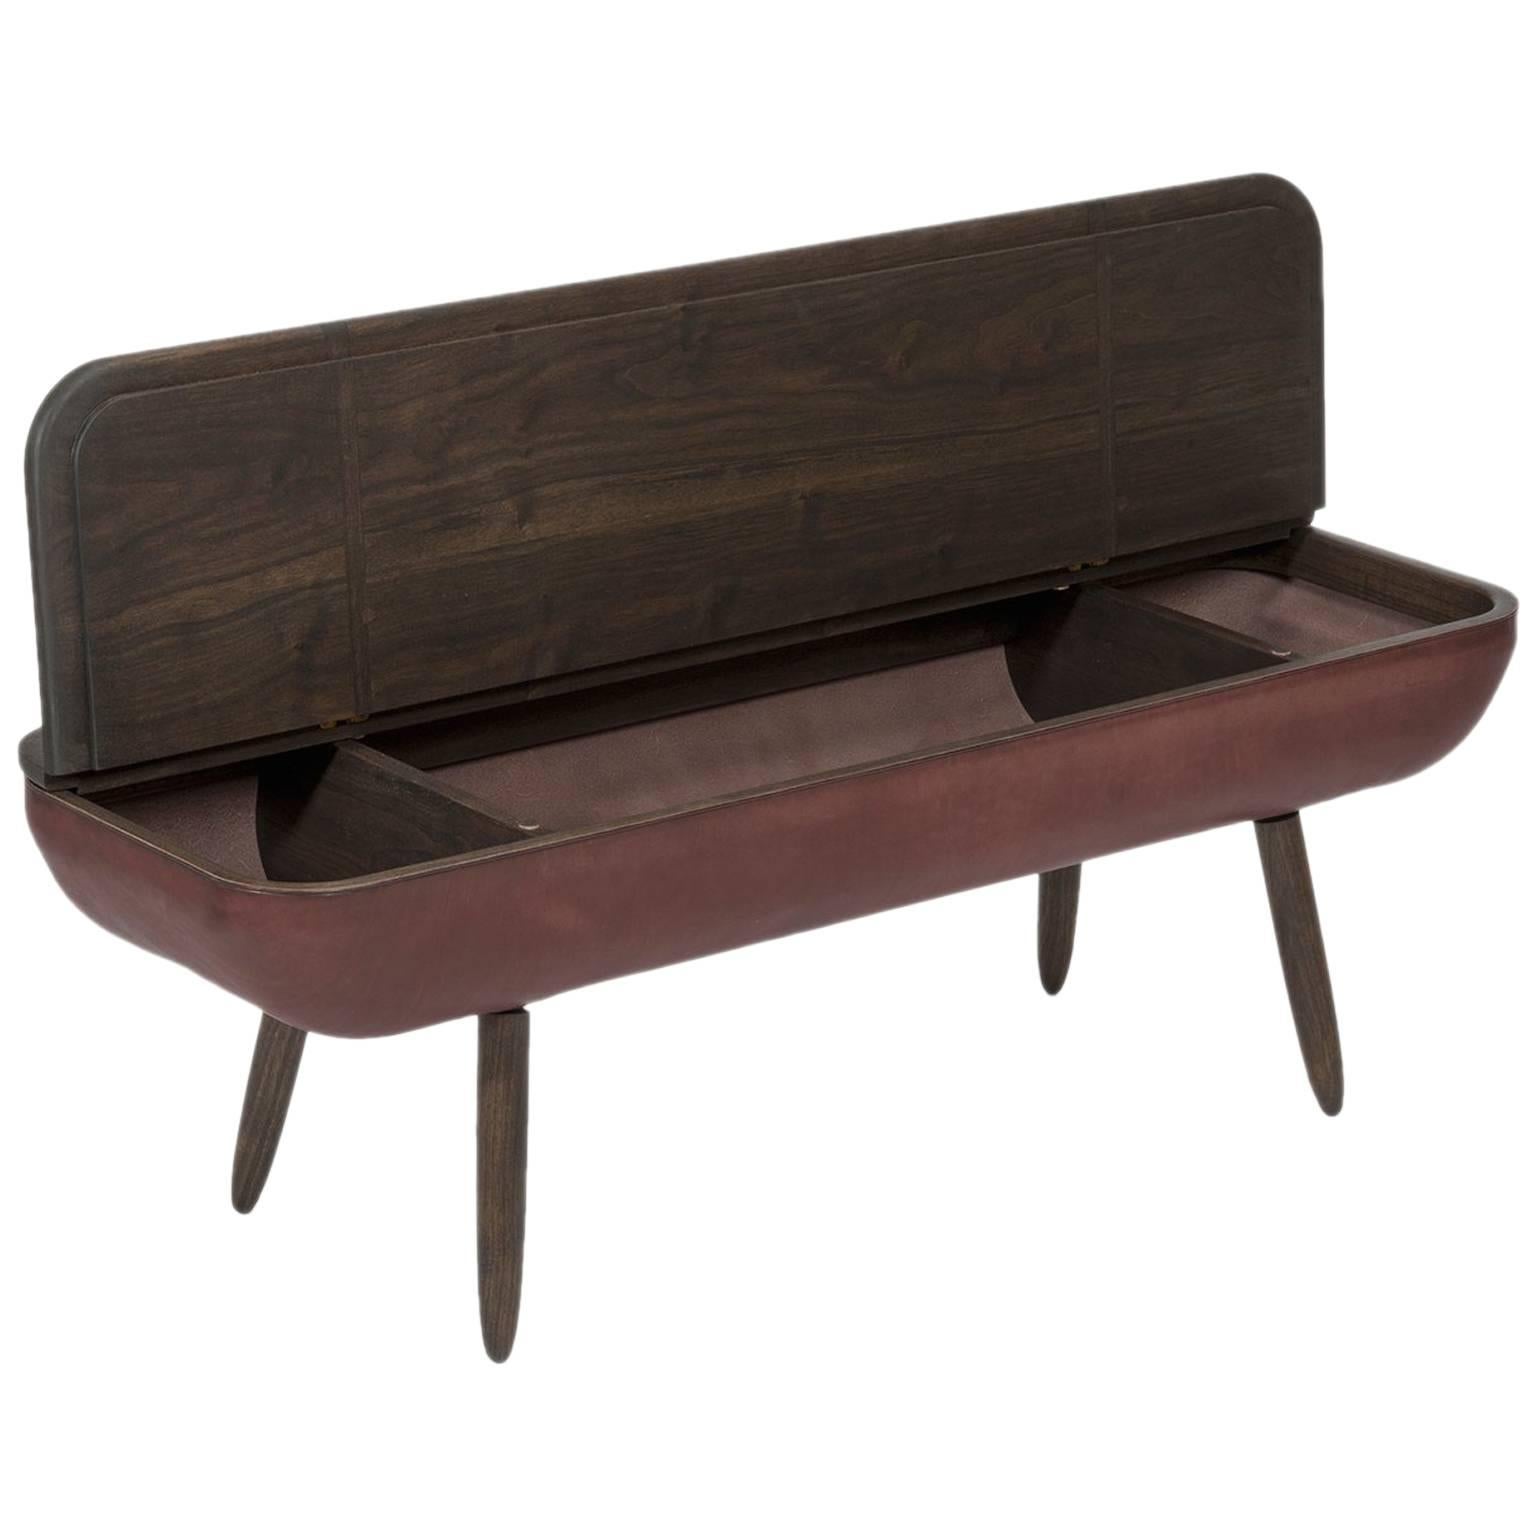 Coracle Bench with Storage, Walnut and eco-friendly Vegetable Tanned Leather